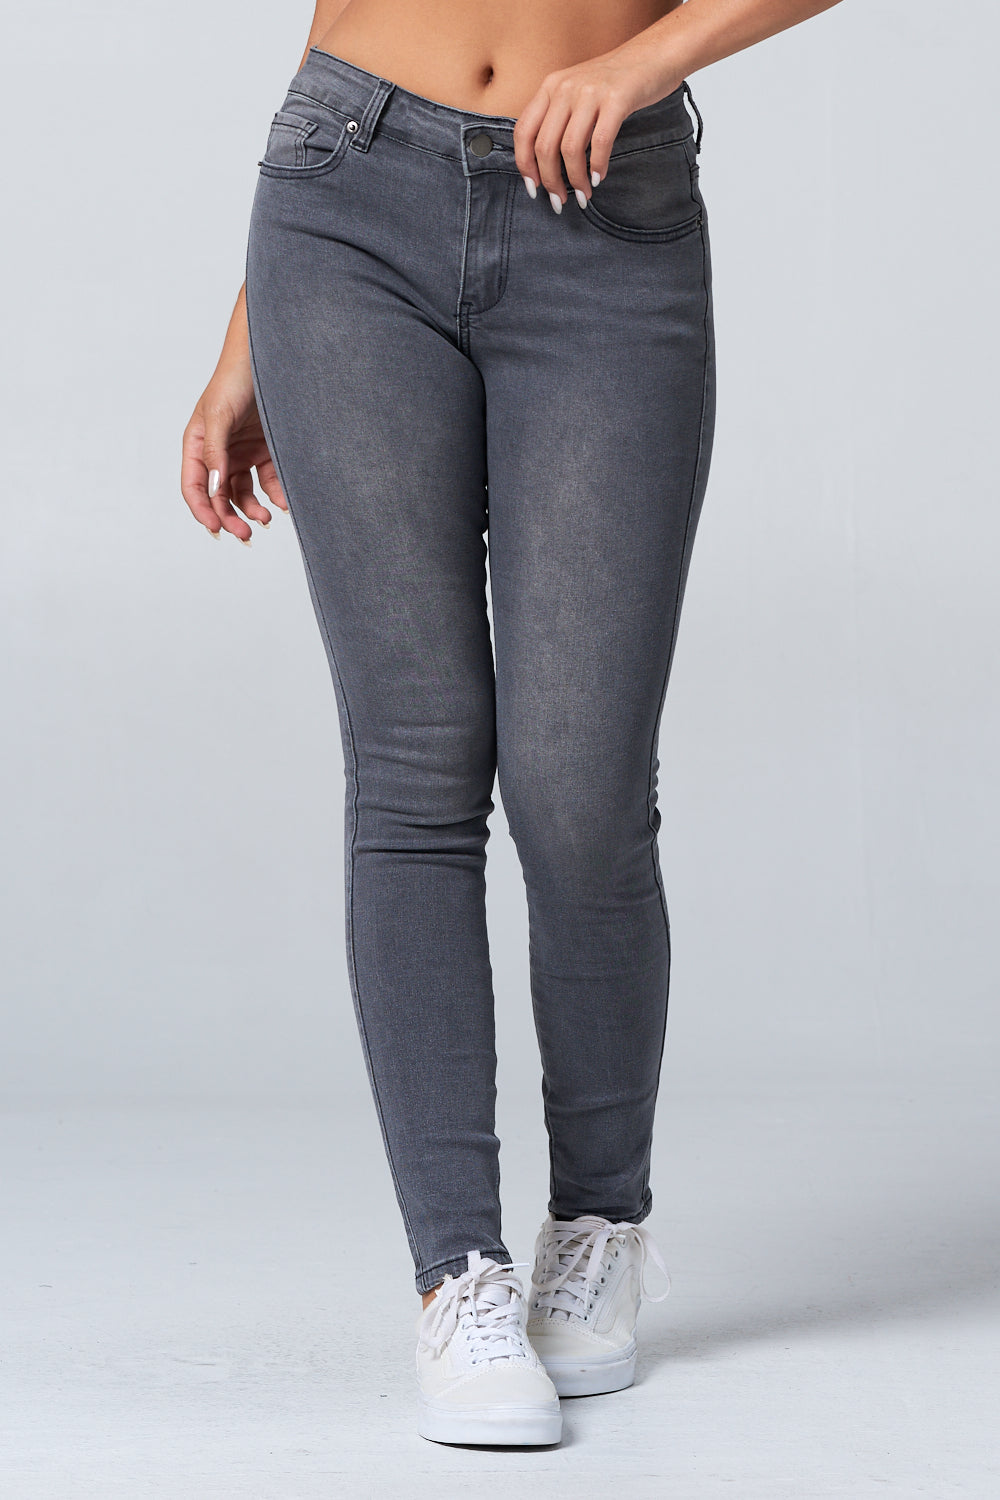 Classic Mid Rise Skinny Jean Extreme Stretch Gray WR3702